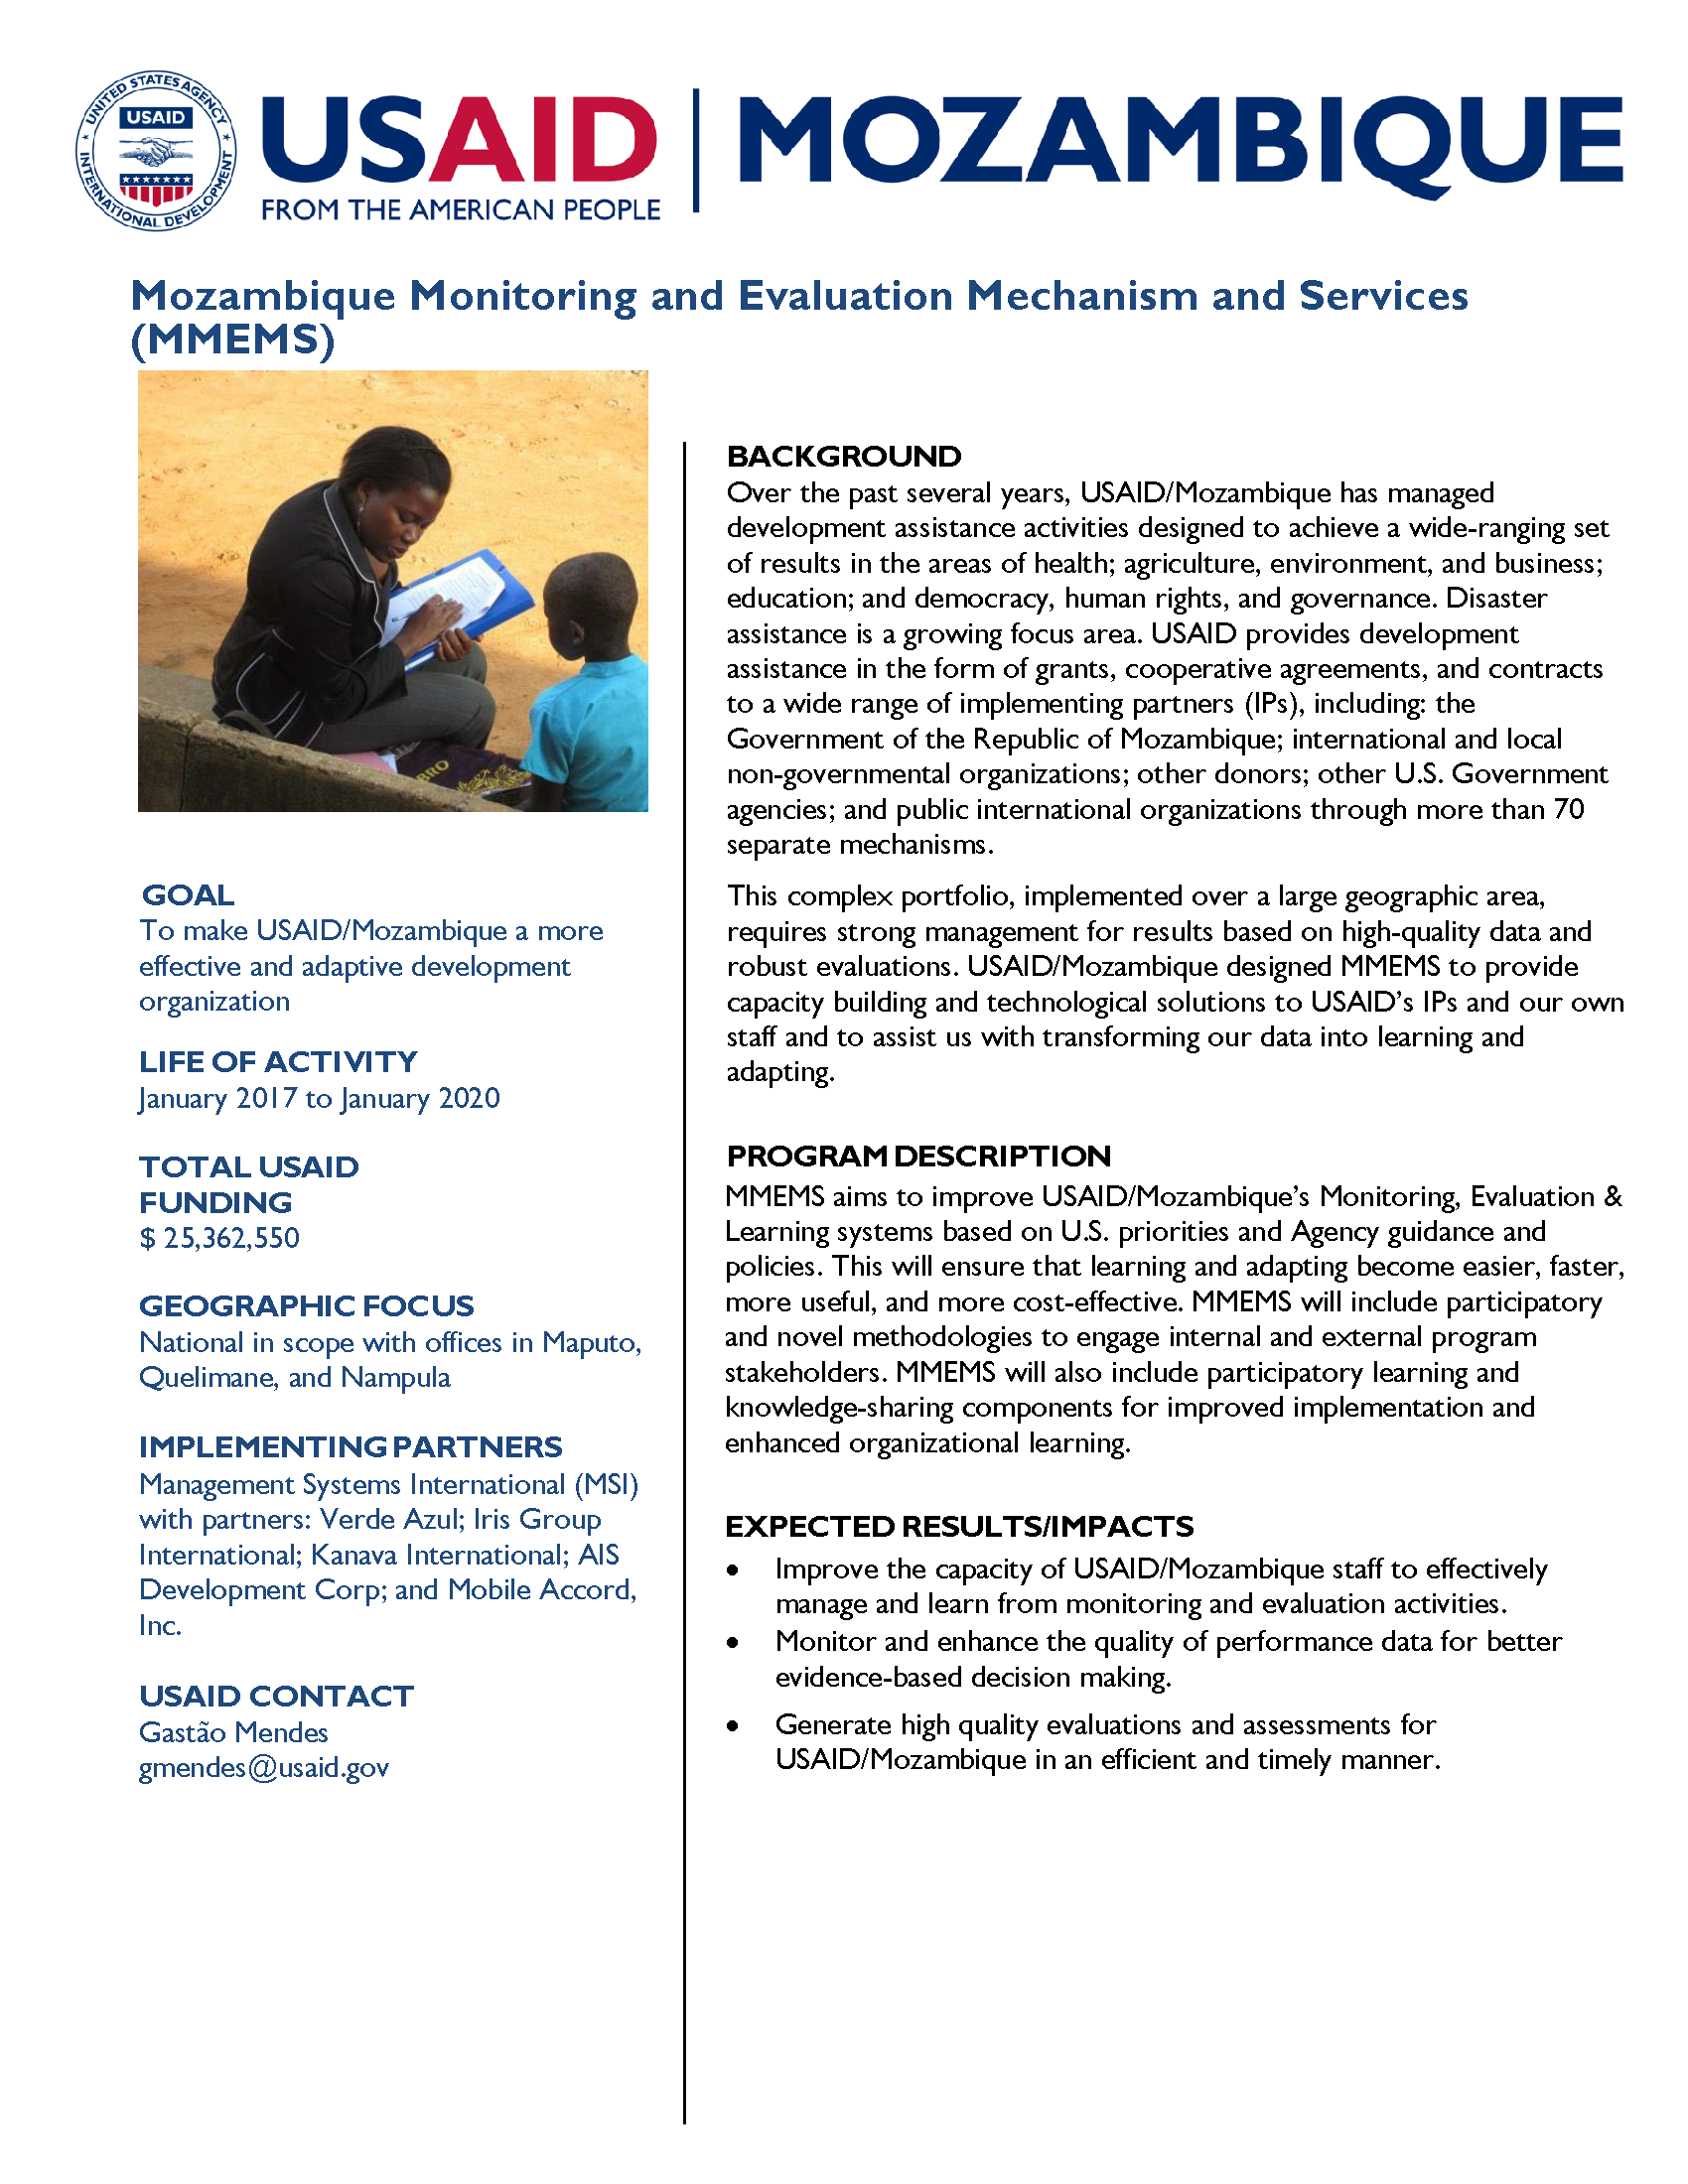 Mozambique Monitoring and Evaluation Mechanism and Services Fact Sheet